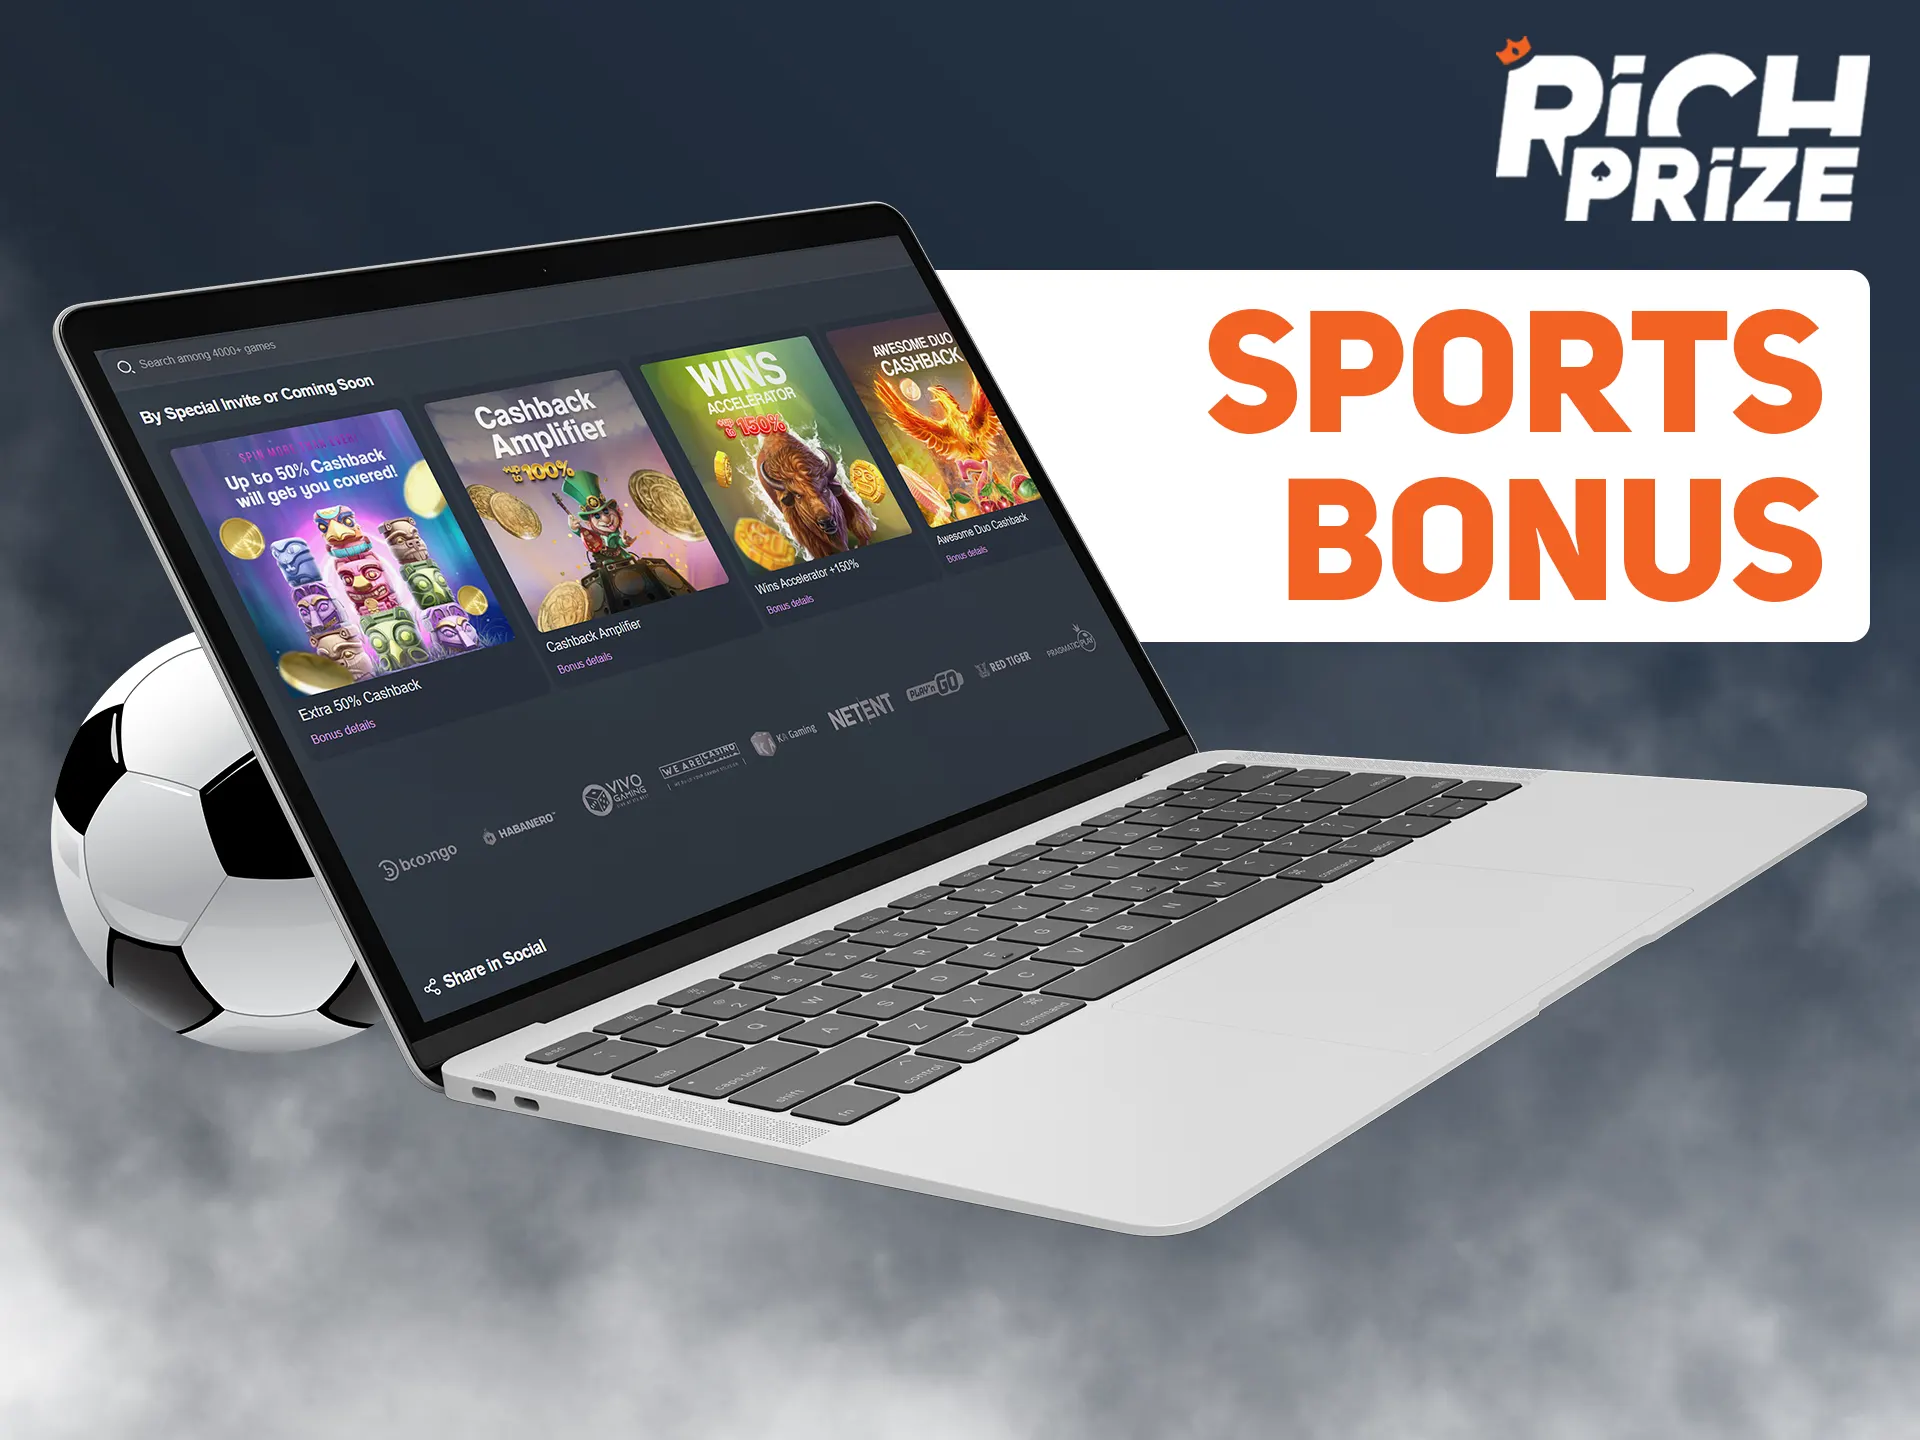 Bet on sports and get bonuses at Richprize.